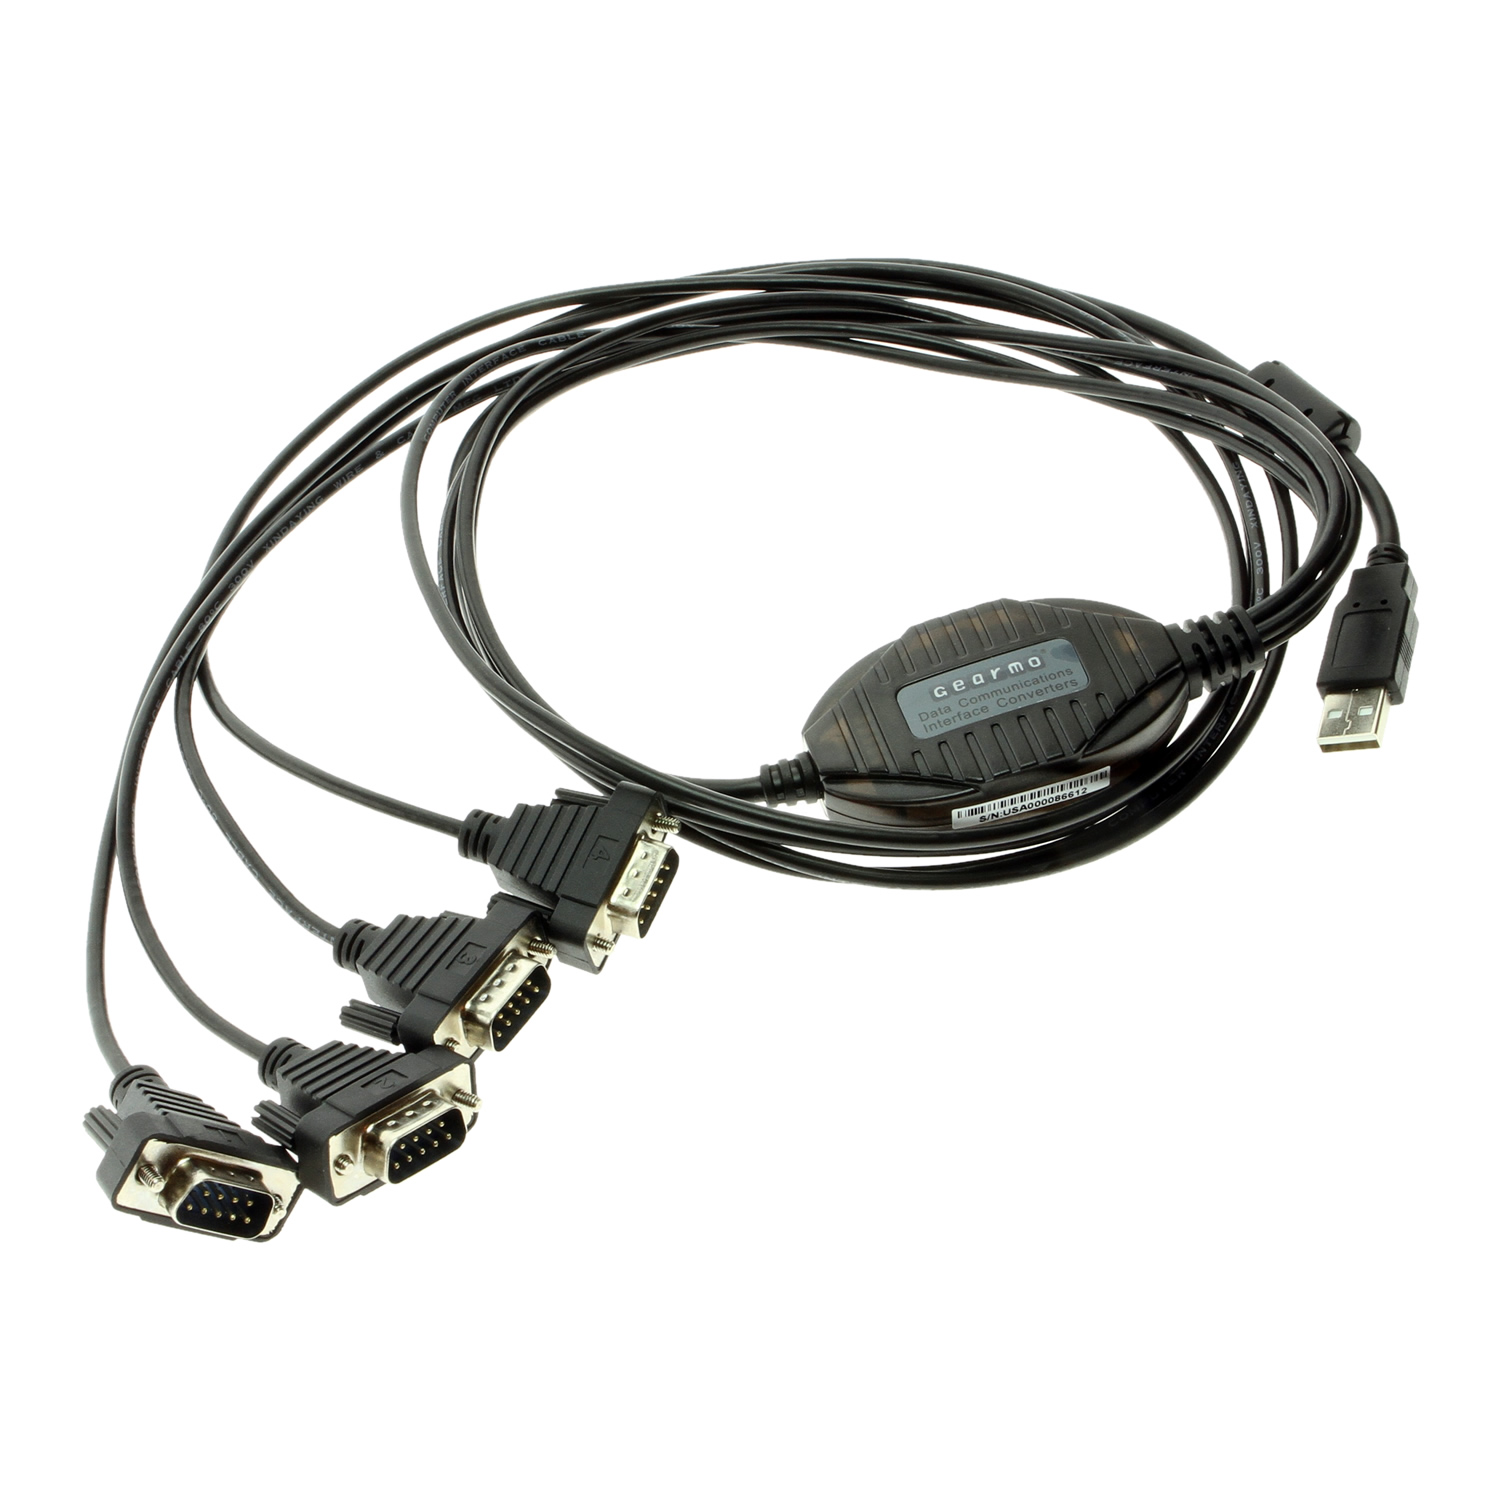 4 Professional USB to Serial Adapter